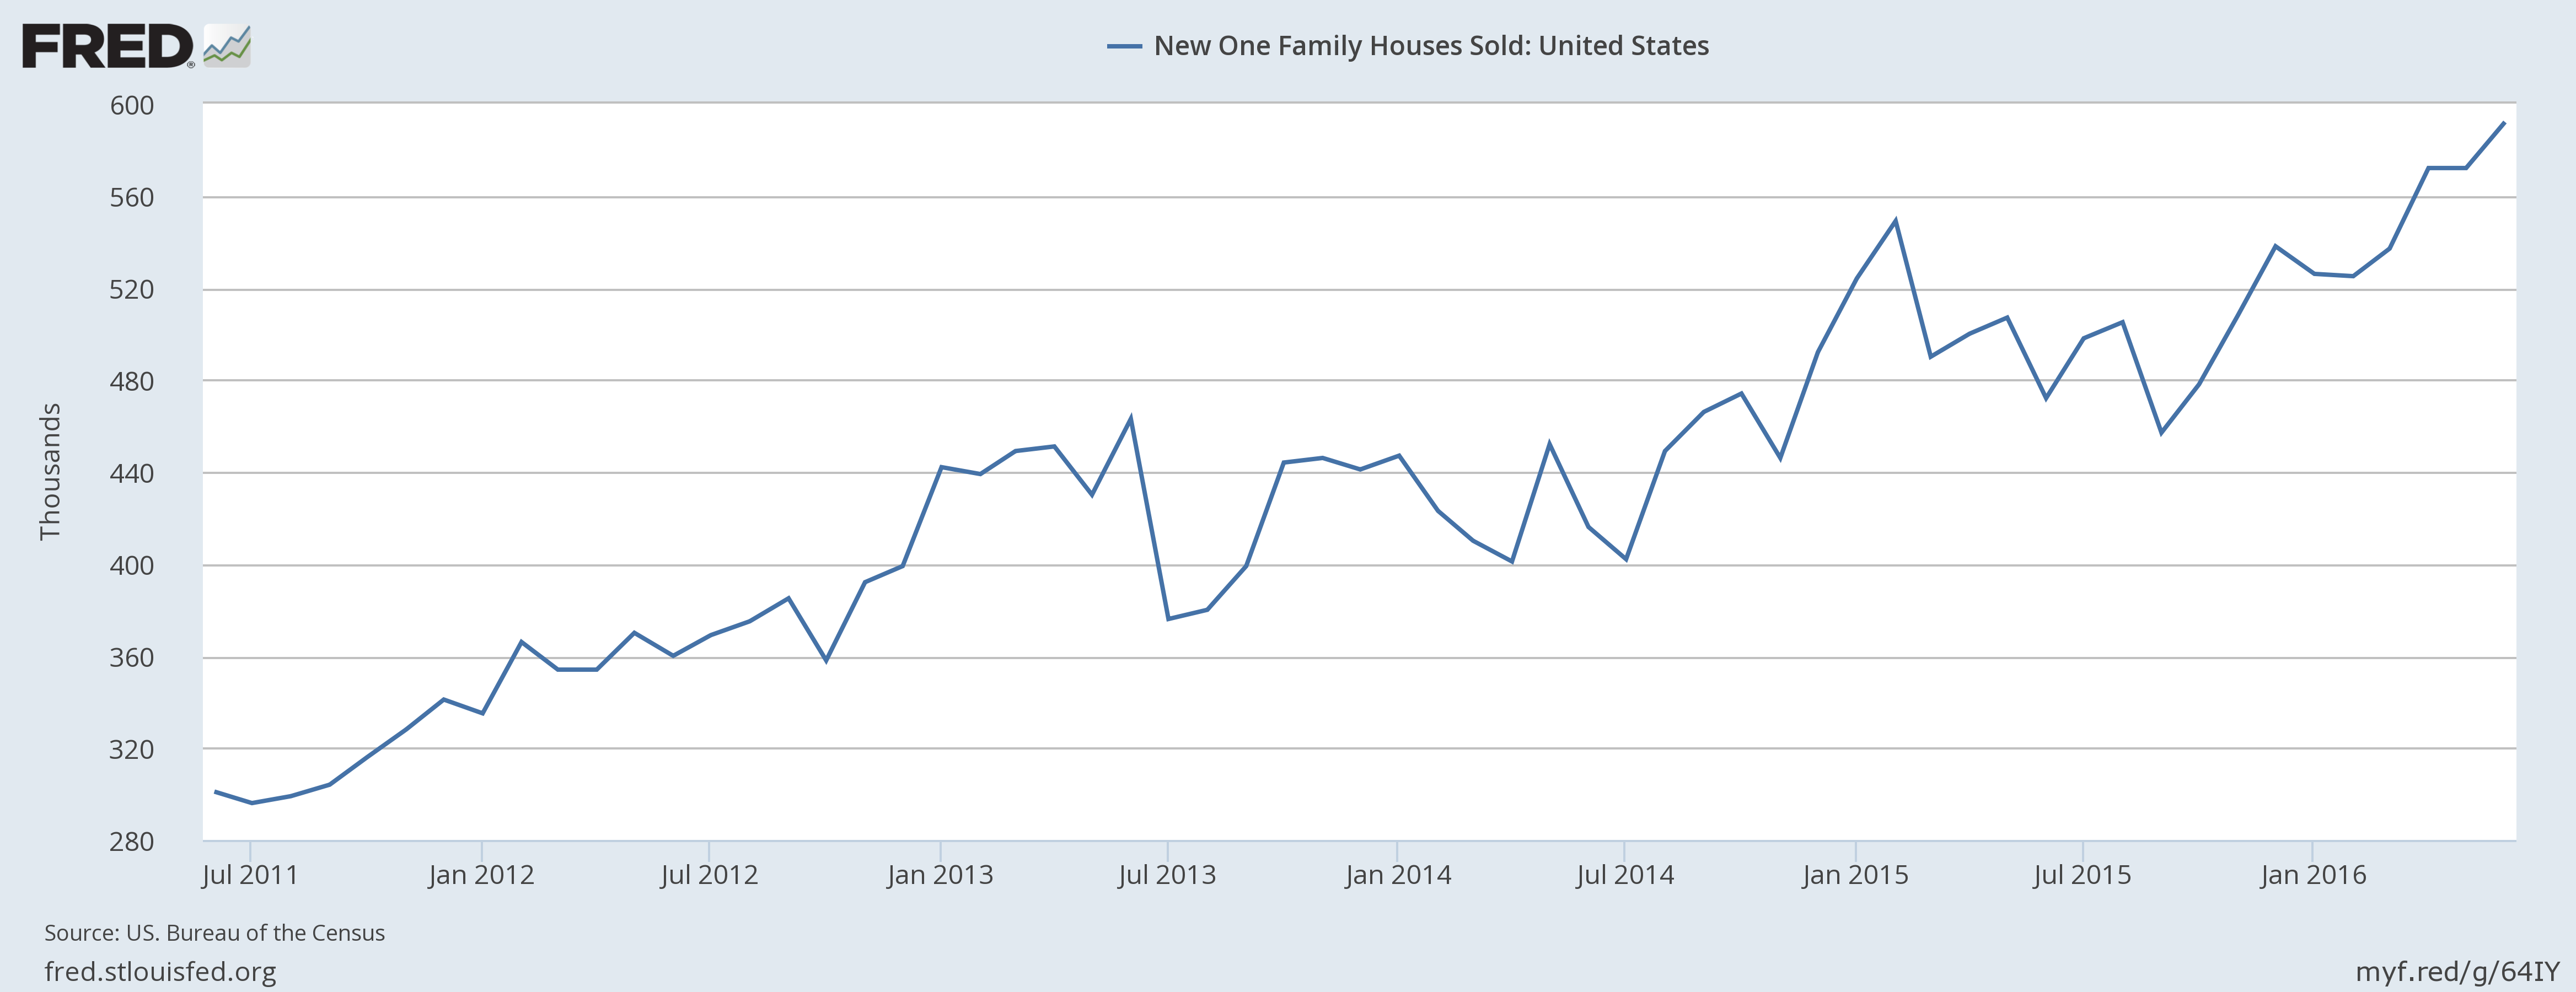 US: New One Family Houses Sold 2001-2016